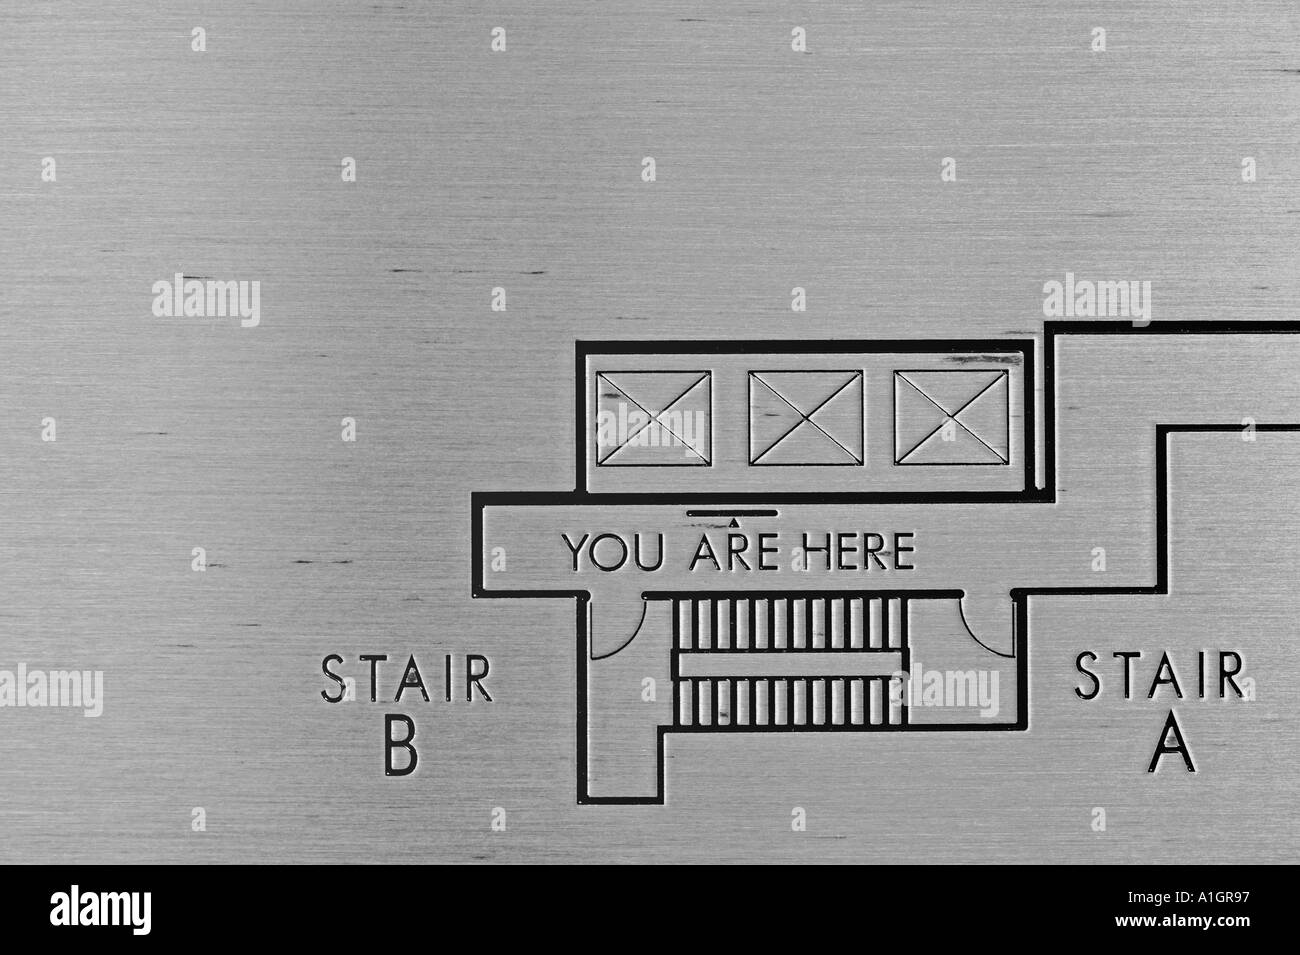 Floor Plan In High Rise Building Stock Photo